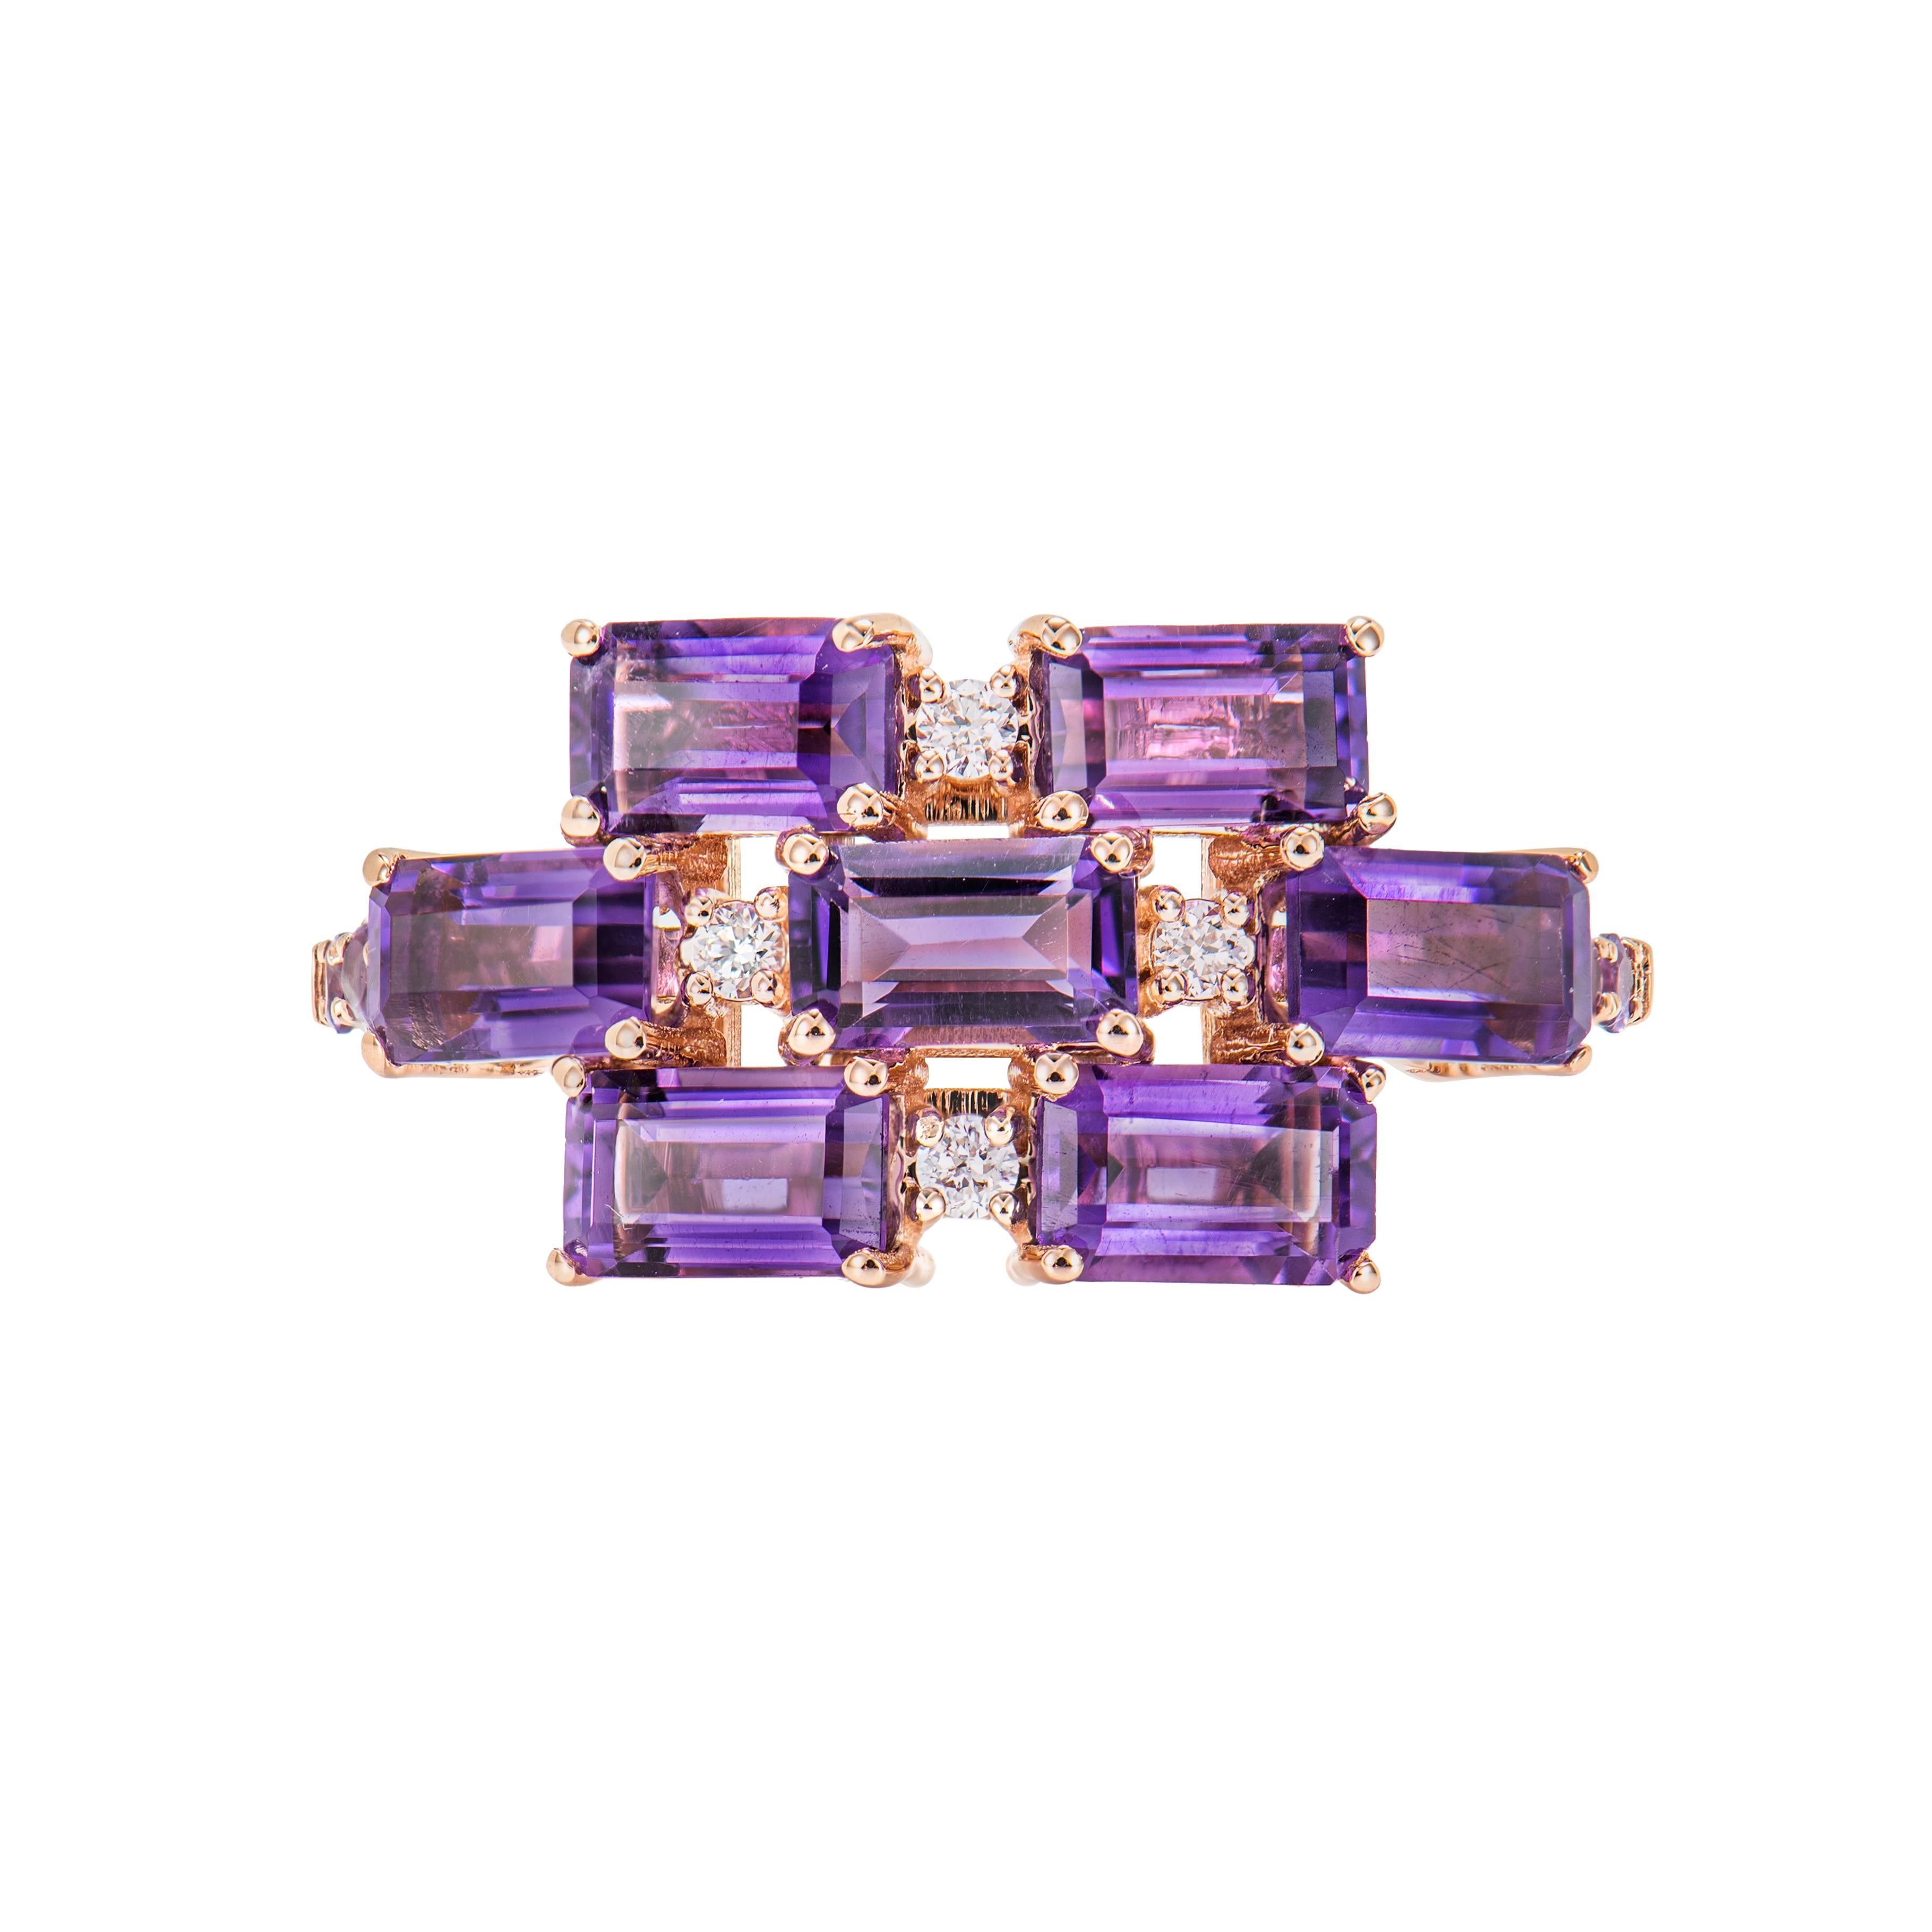 Contemporary 2.12 Carat Amethyst Fancy Ring in 18Karat Rose Gold with White Diamond.   For Sale